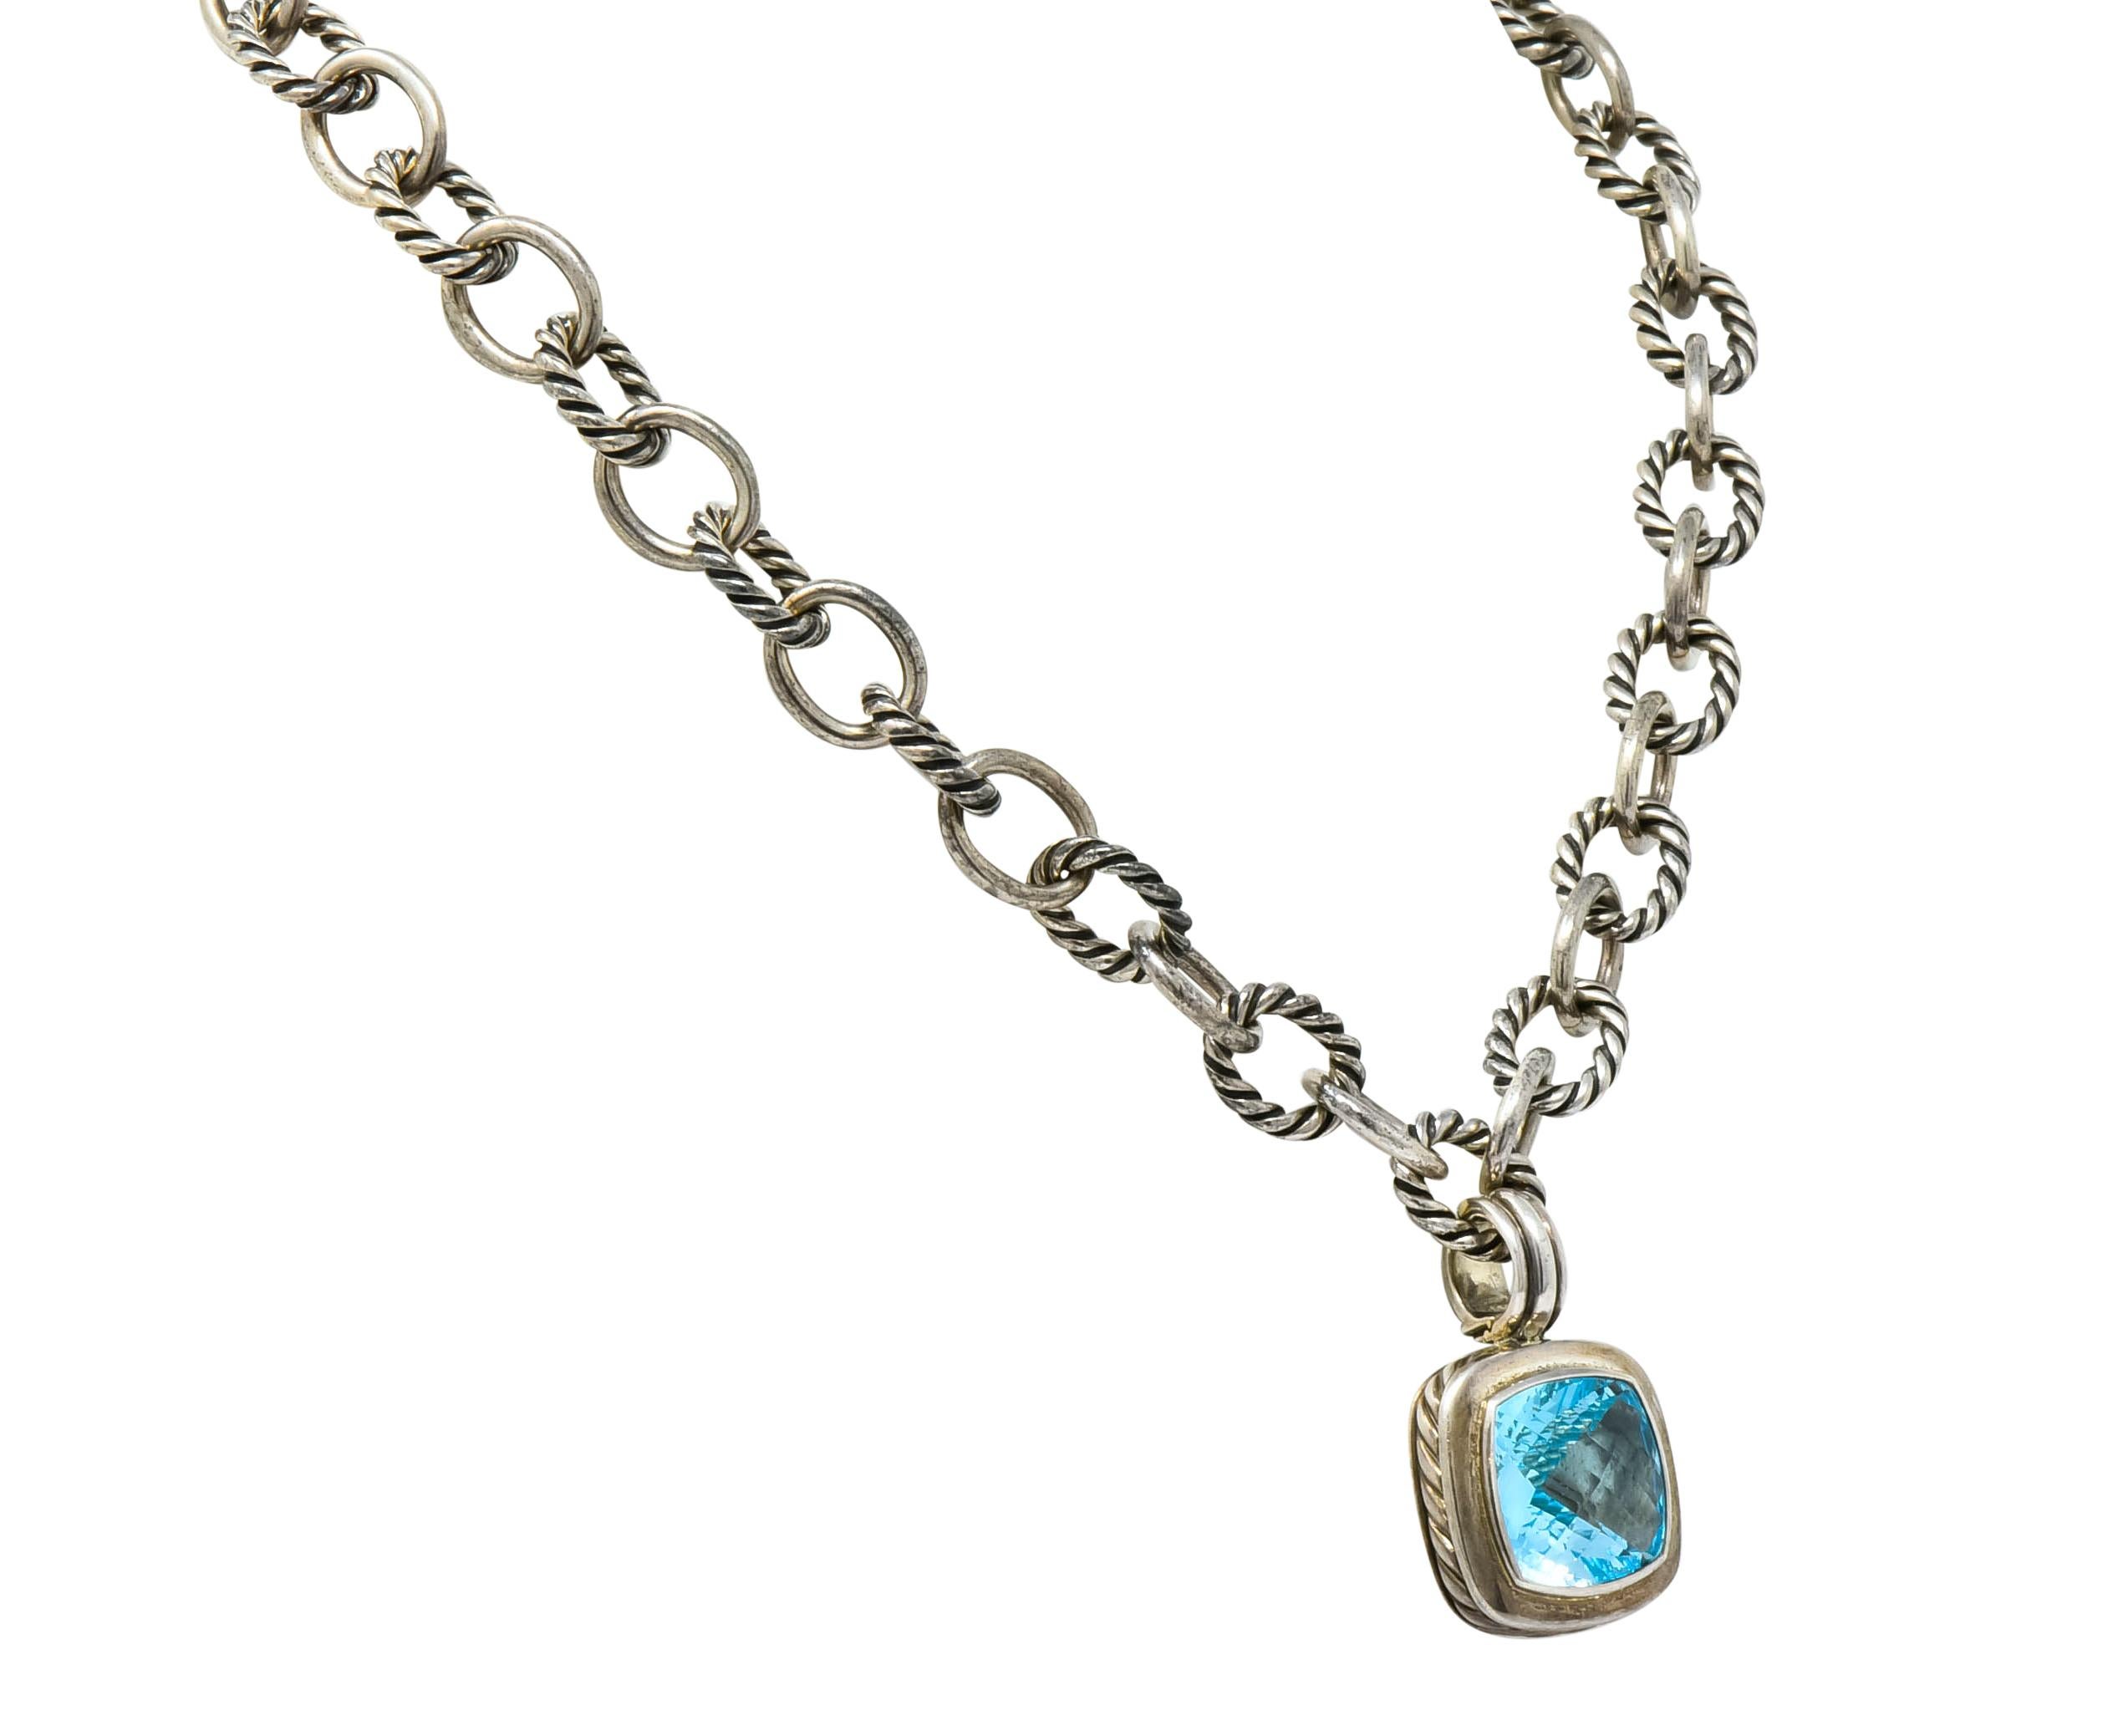 Centering a faceted cushion cut blue topaz, transparent and a saturated electric blue color

Bezel set in a polished silver surround with a ribbed, hinged bale and accented by twisted cable motif

Accompanied by necklace comprised of smooth oval